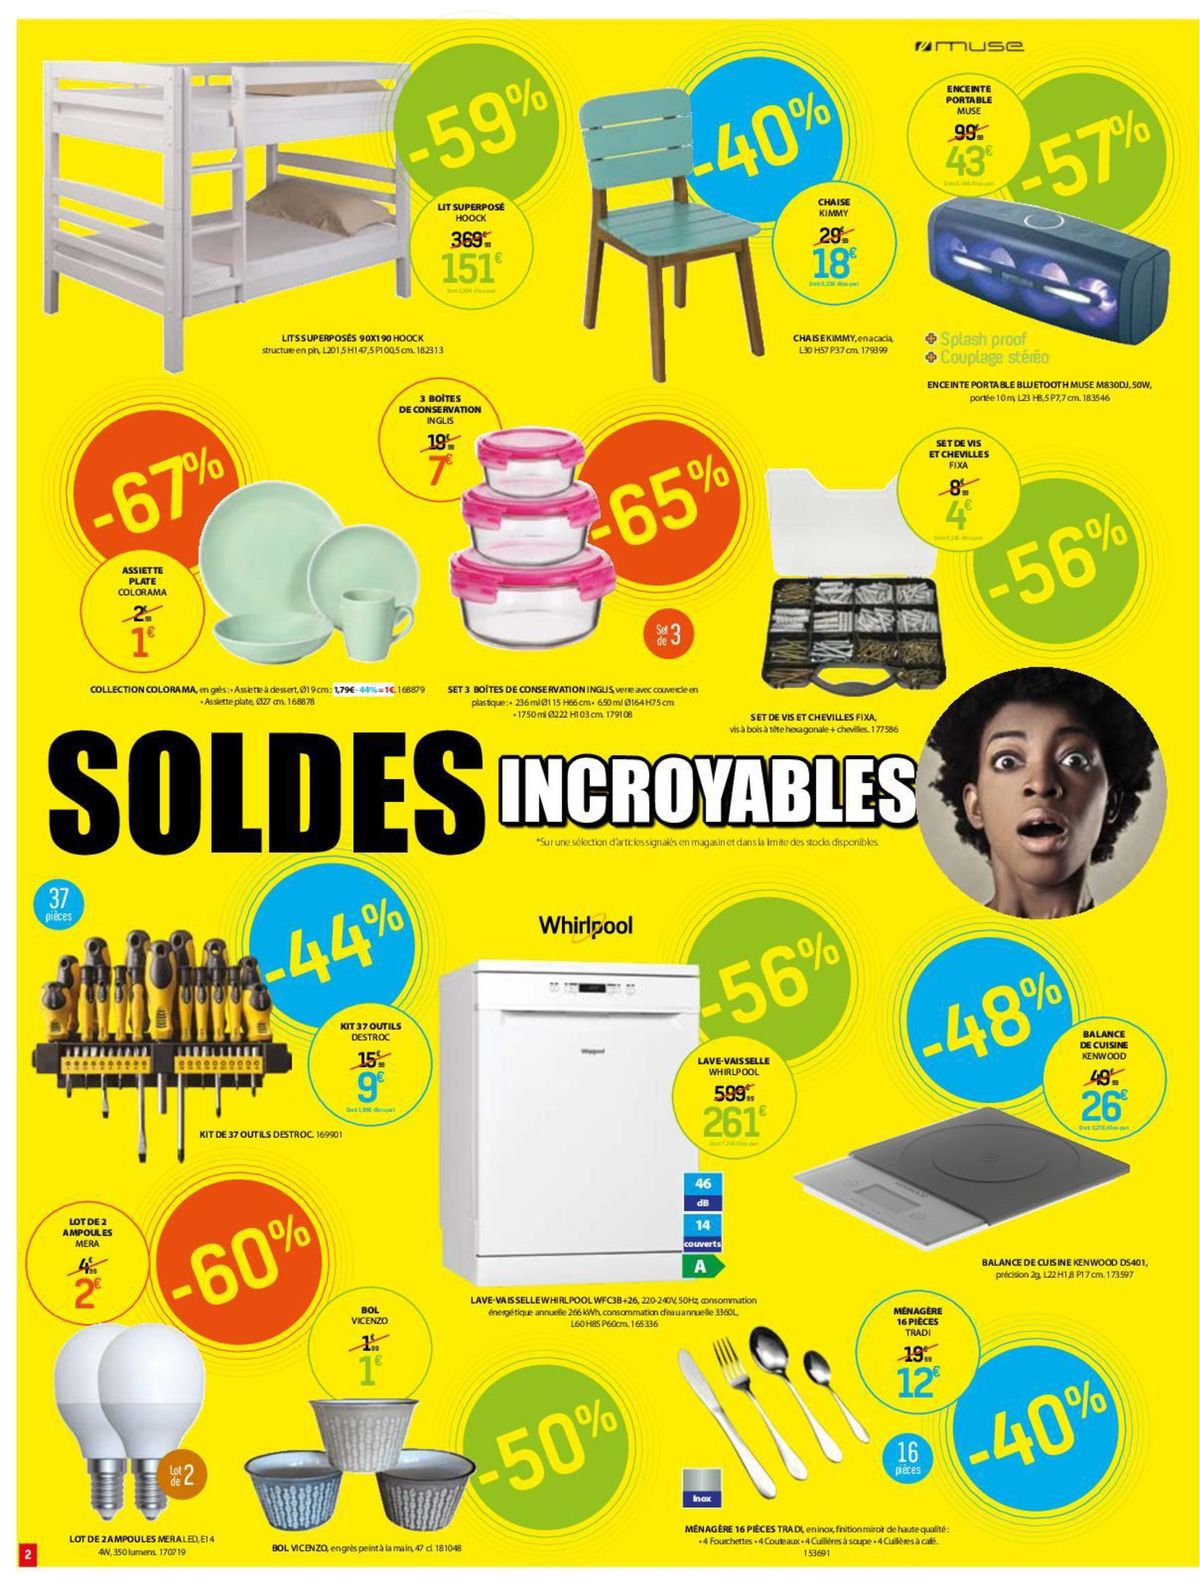 Catalogue Soldes incroyables !, page 00002